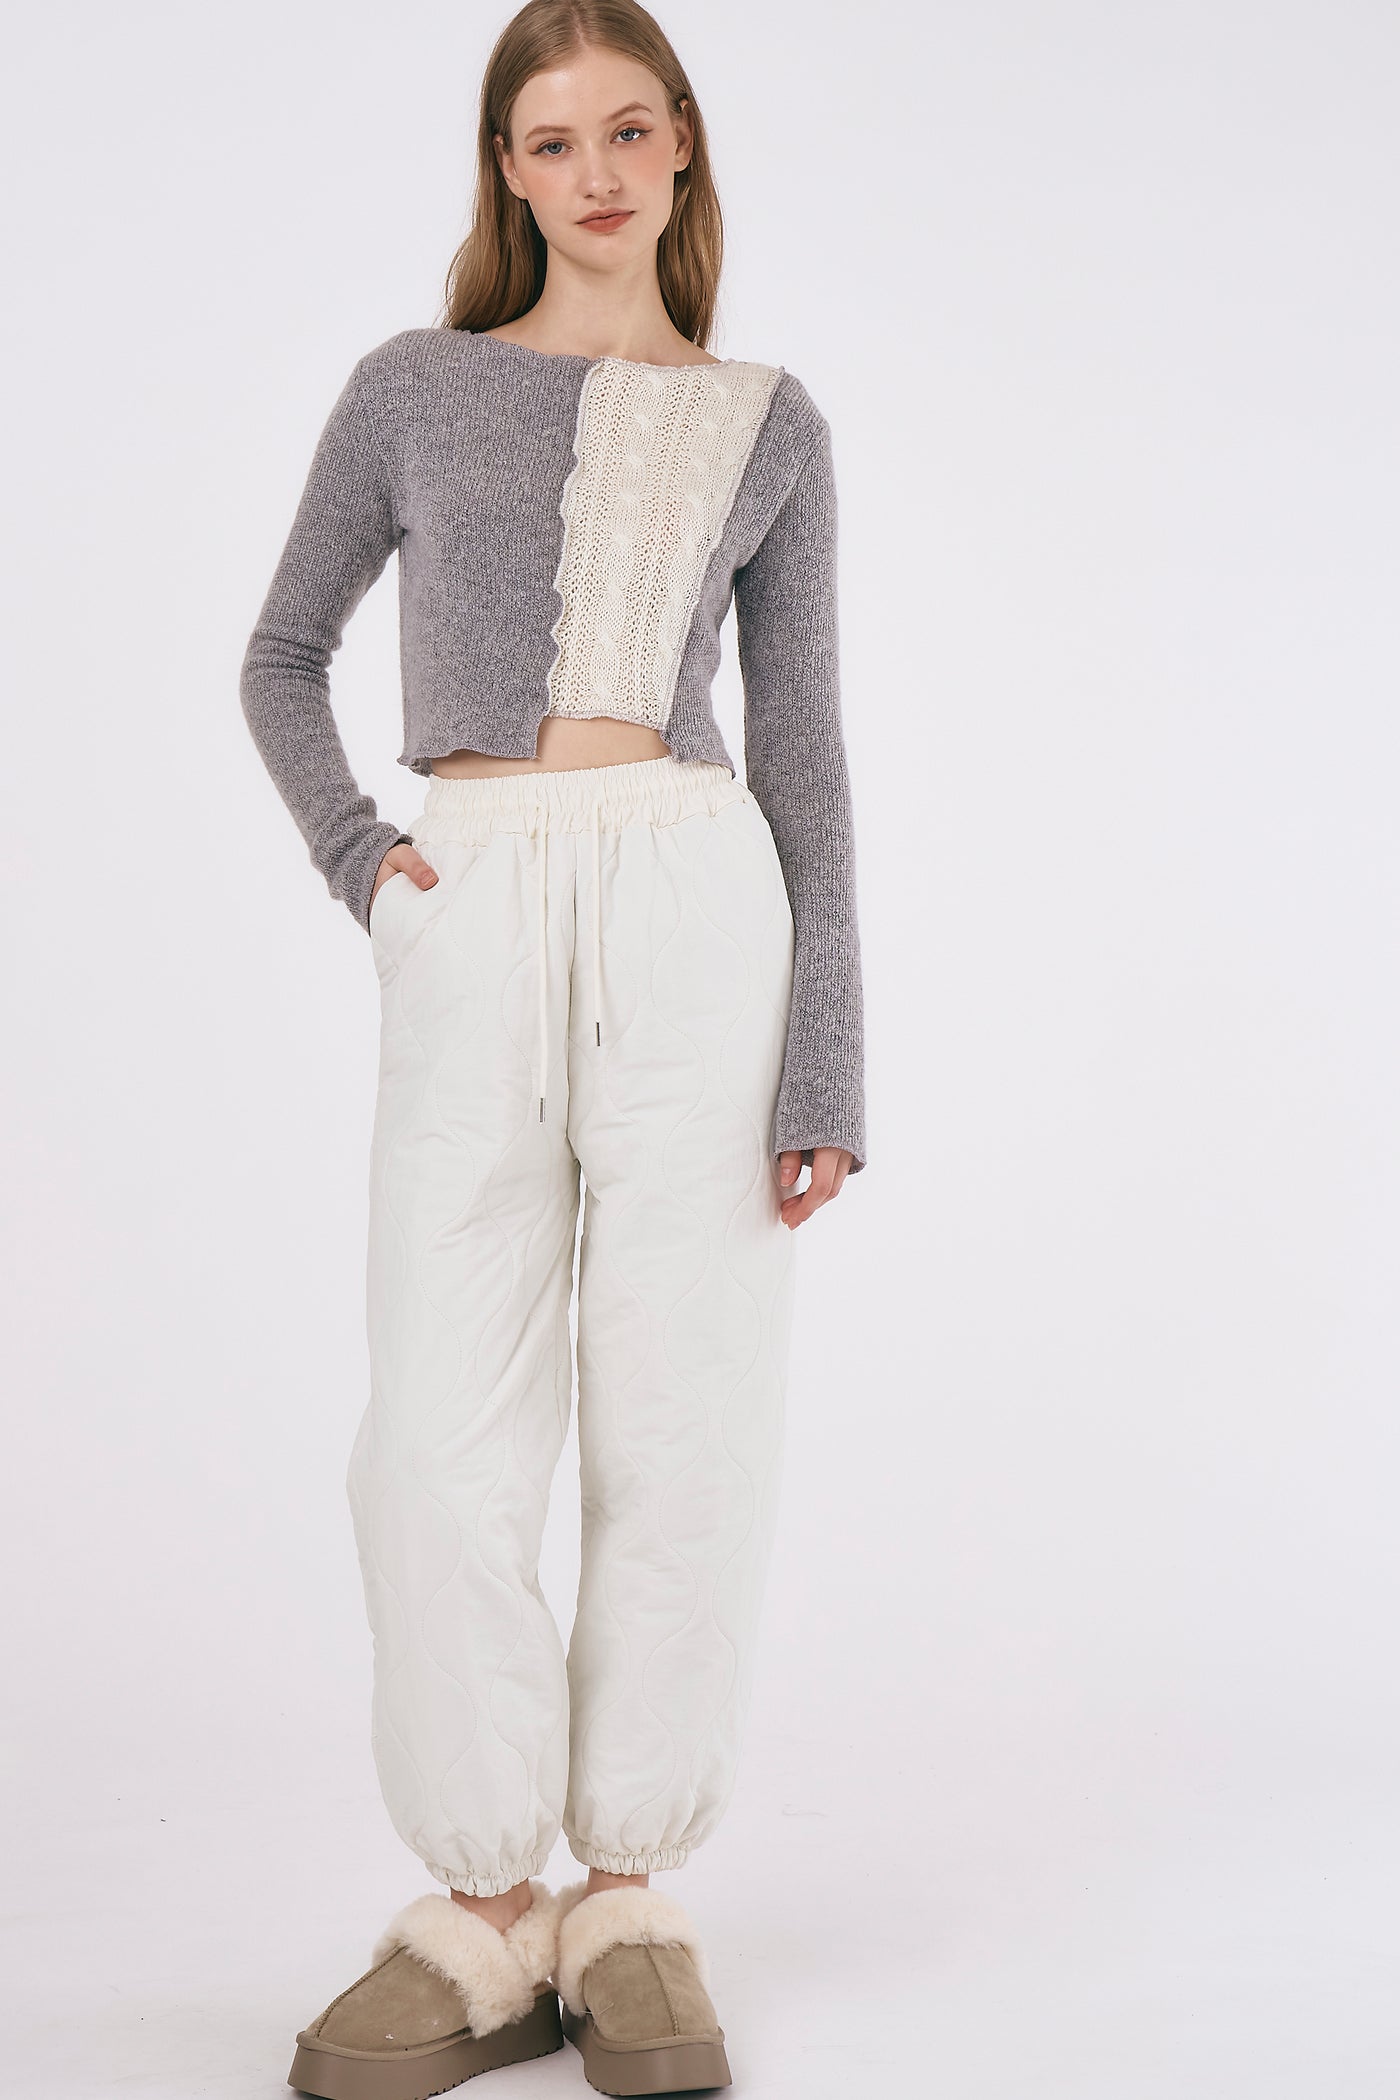 storets.com Riley Knitted Crop Top